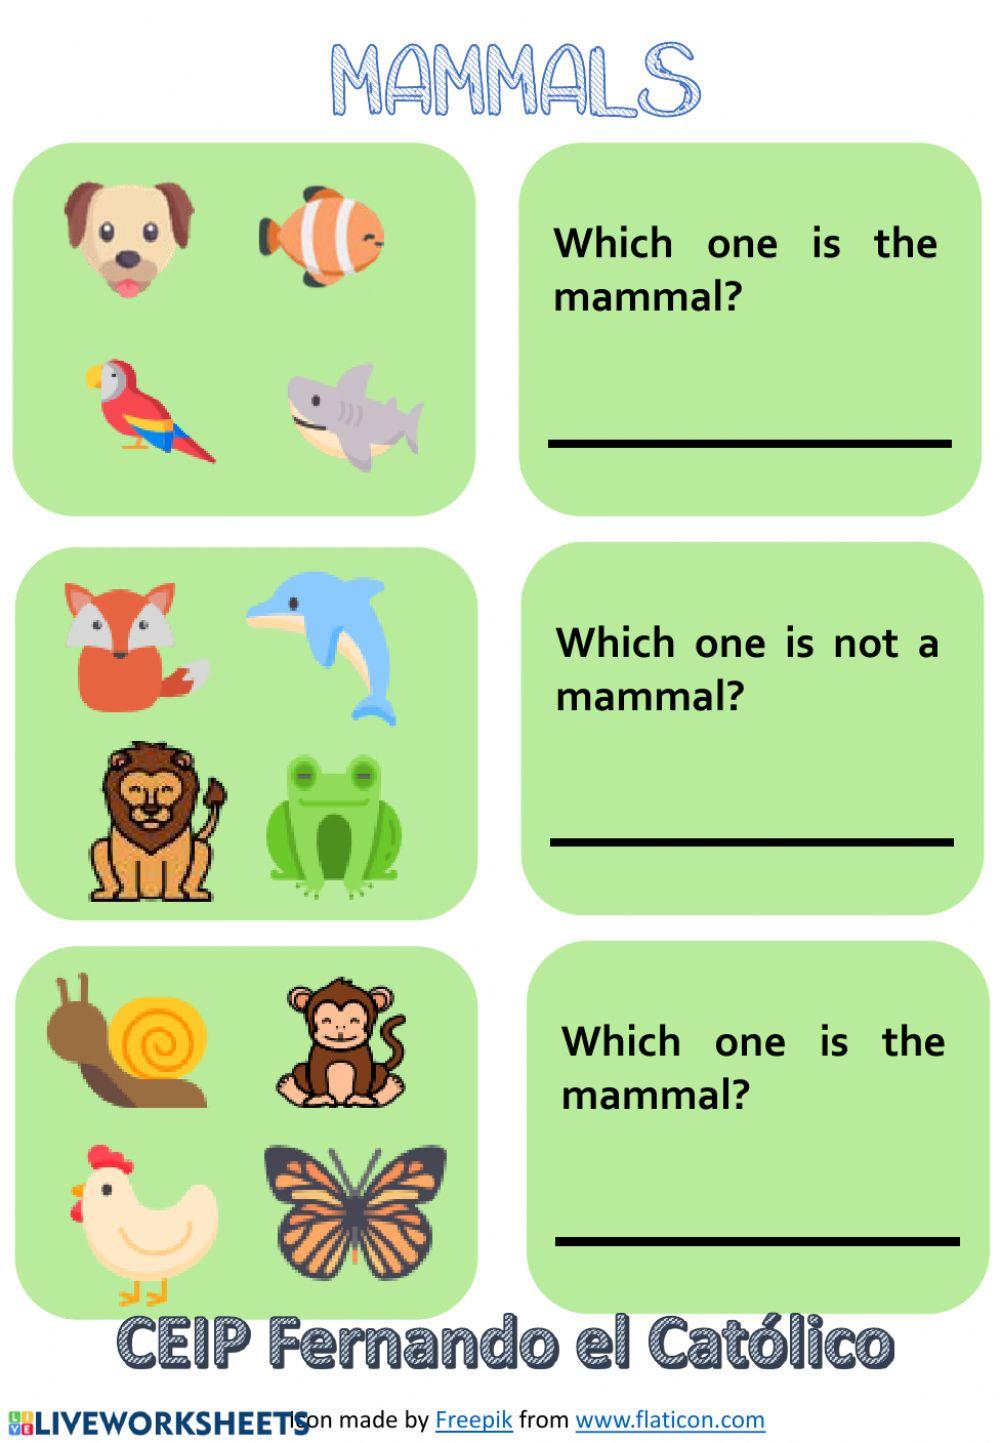 Which ones are mammals?